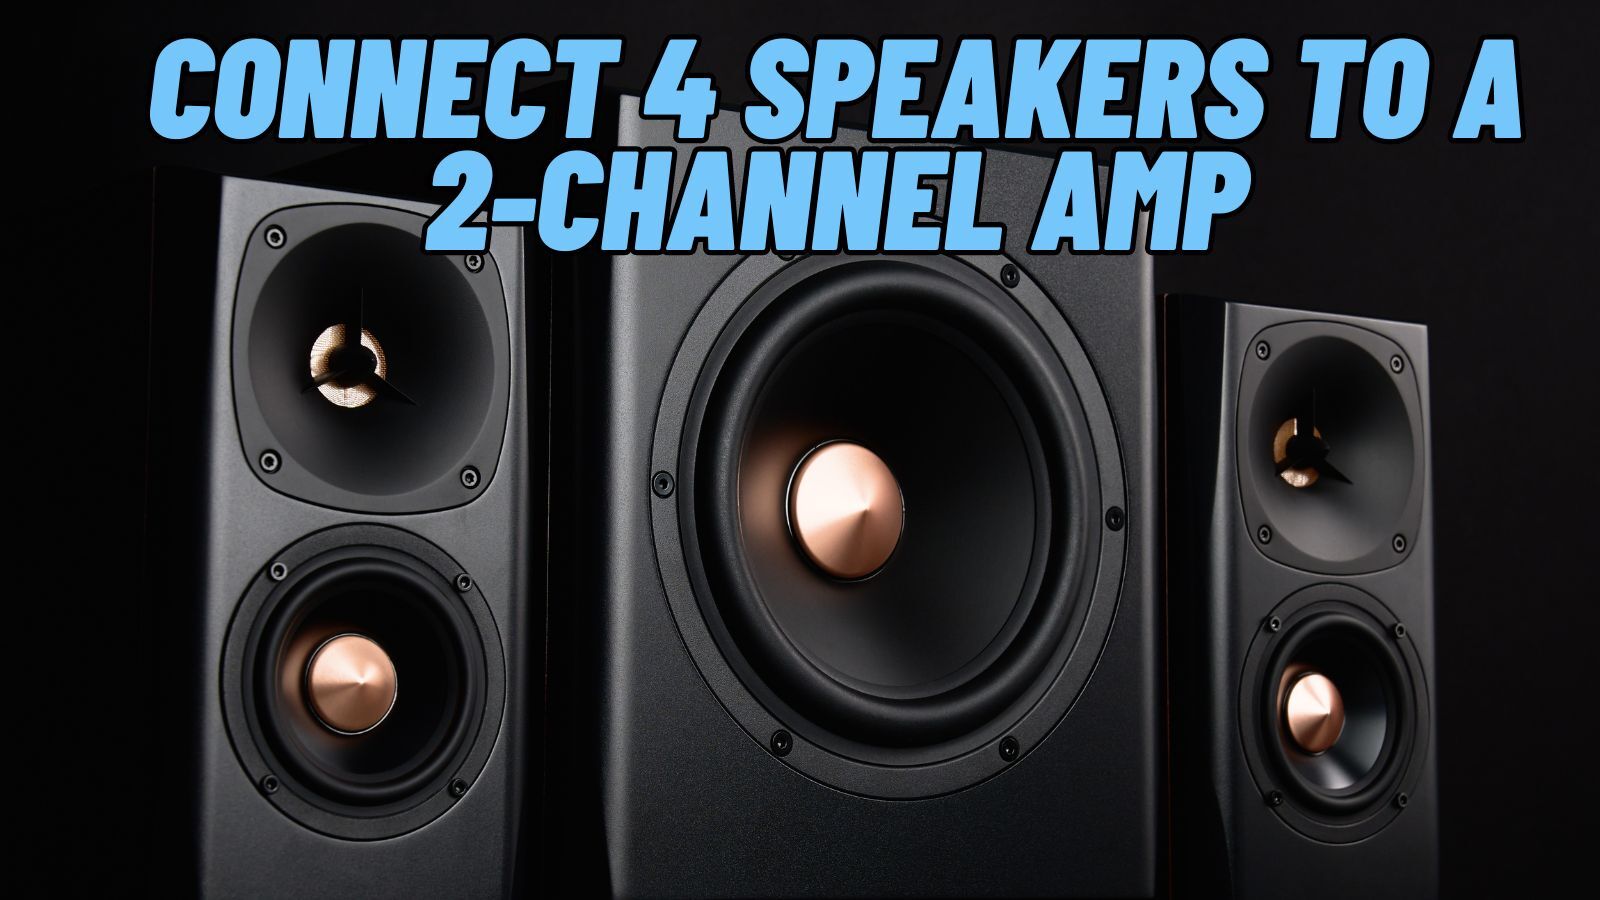 How to Connect 4 Speakers to a 2-Channel Amp? (A Step-by-Step Guide)